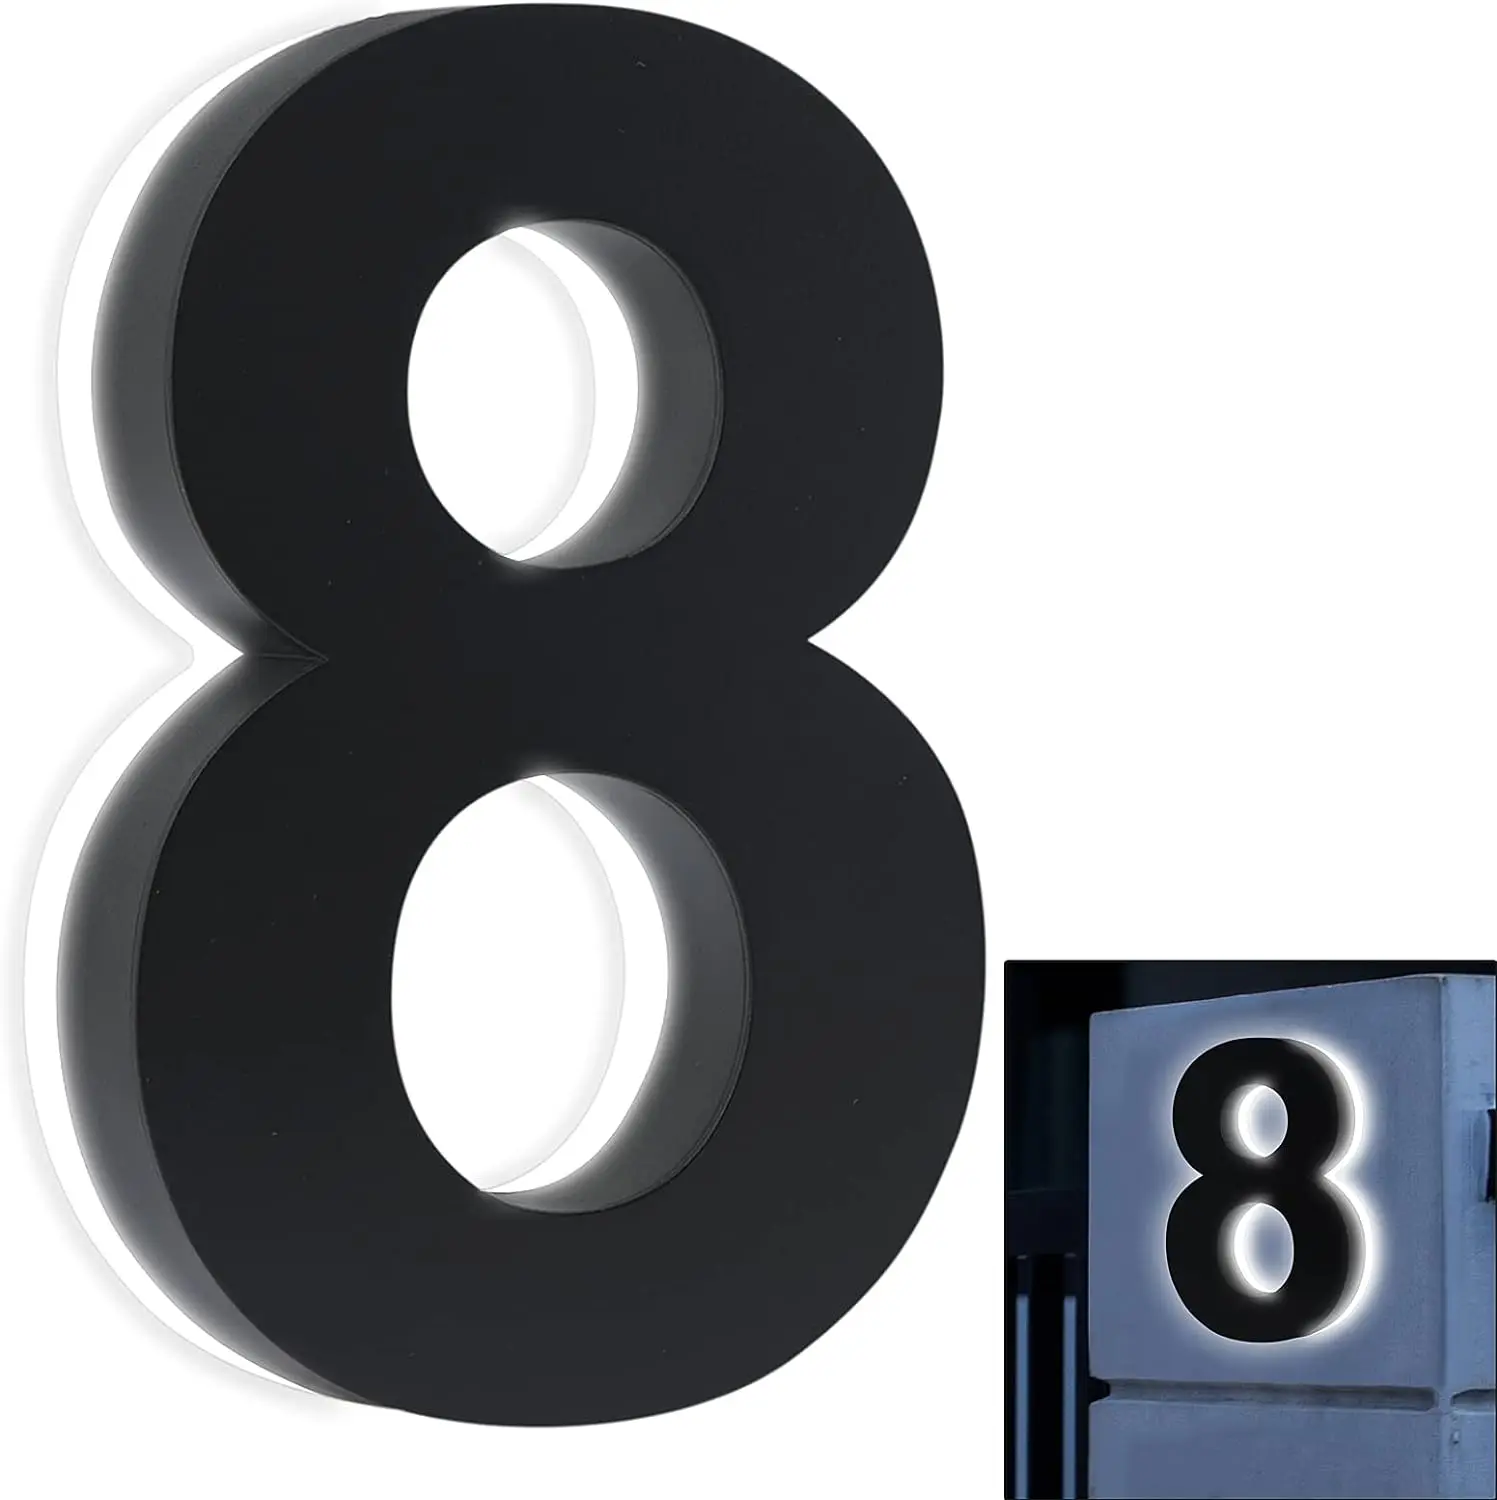 

8 Inch House Numbers Lighted Sign, Stainless Steel, Premium Quality, Backlit LED Illuminated Home Address Number,Waterproof